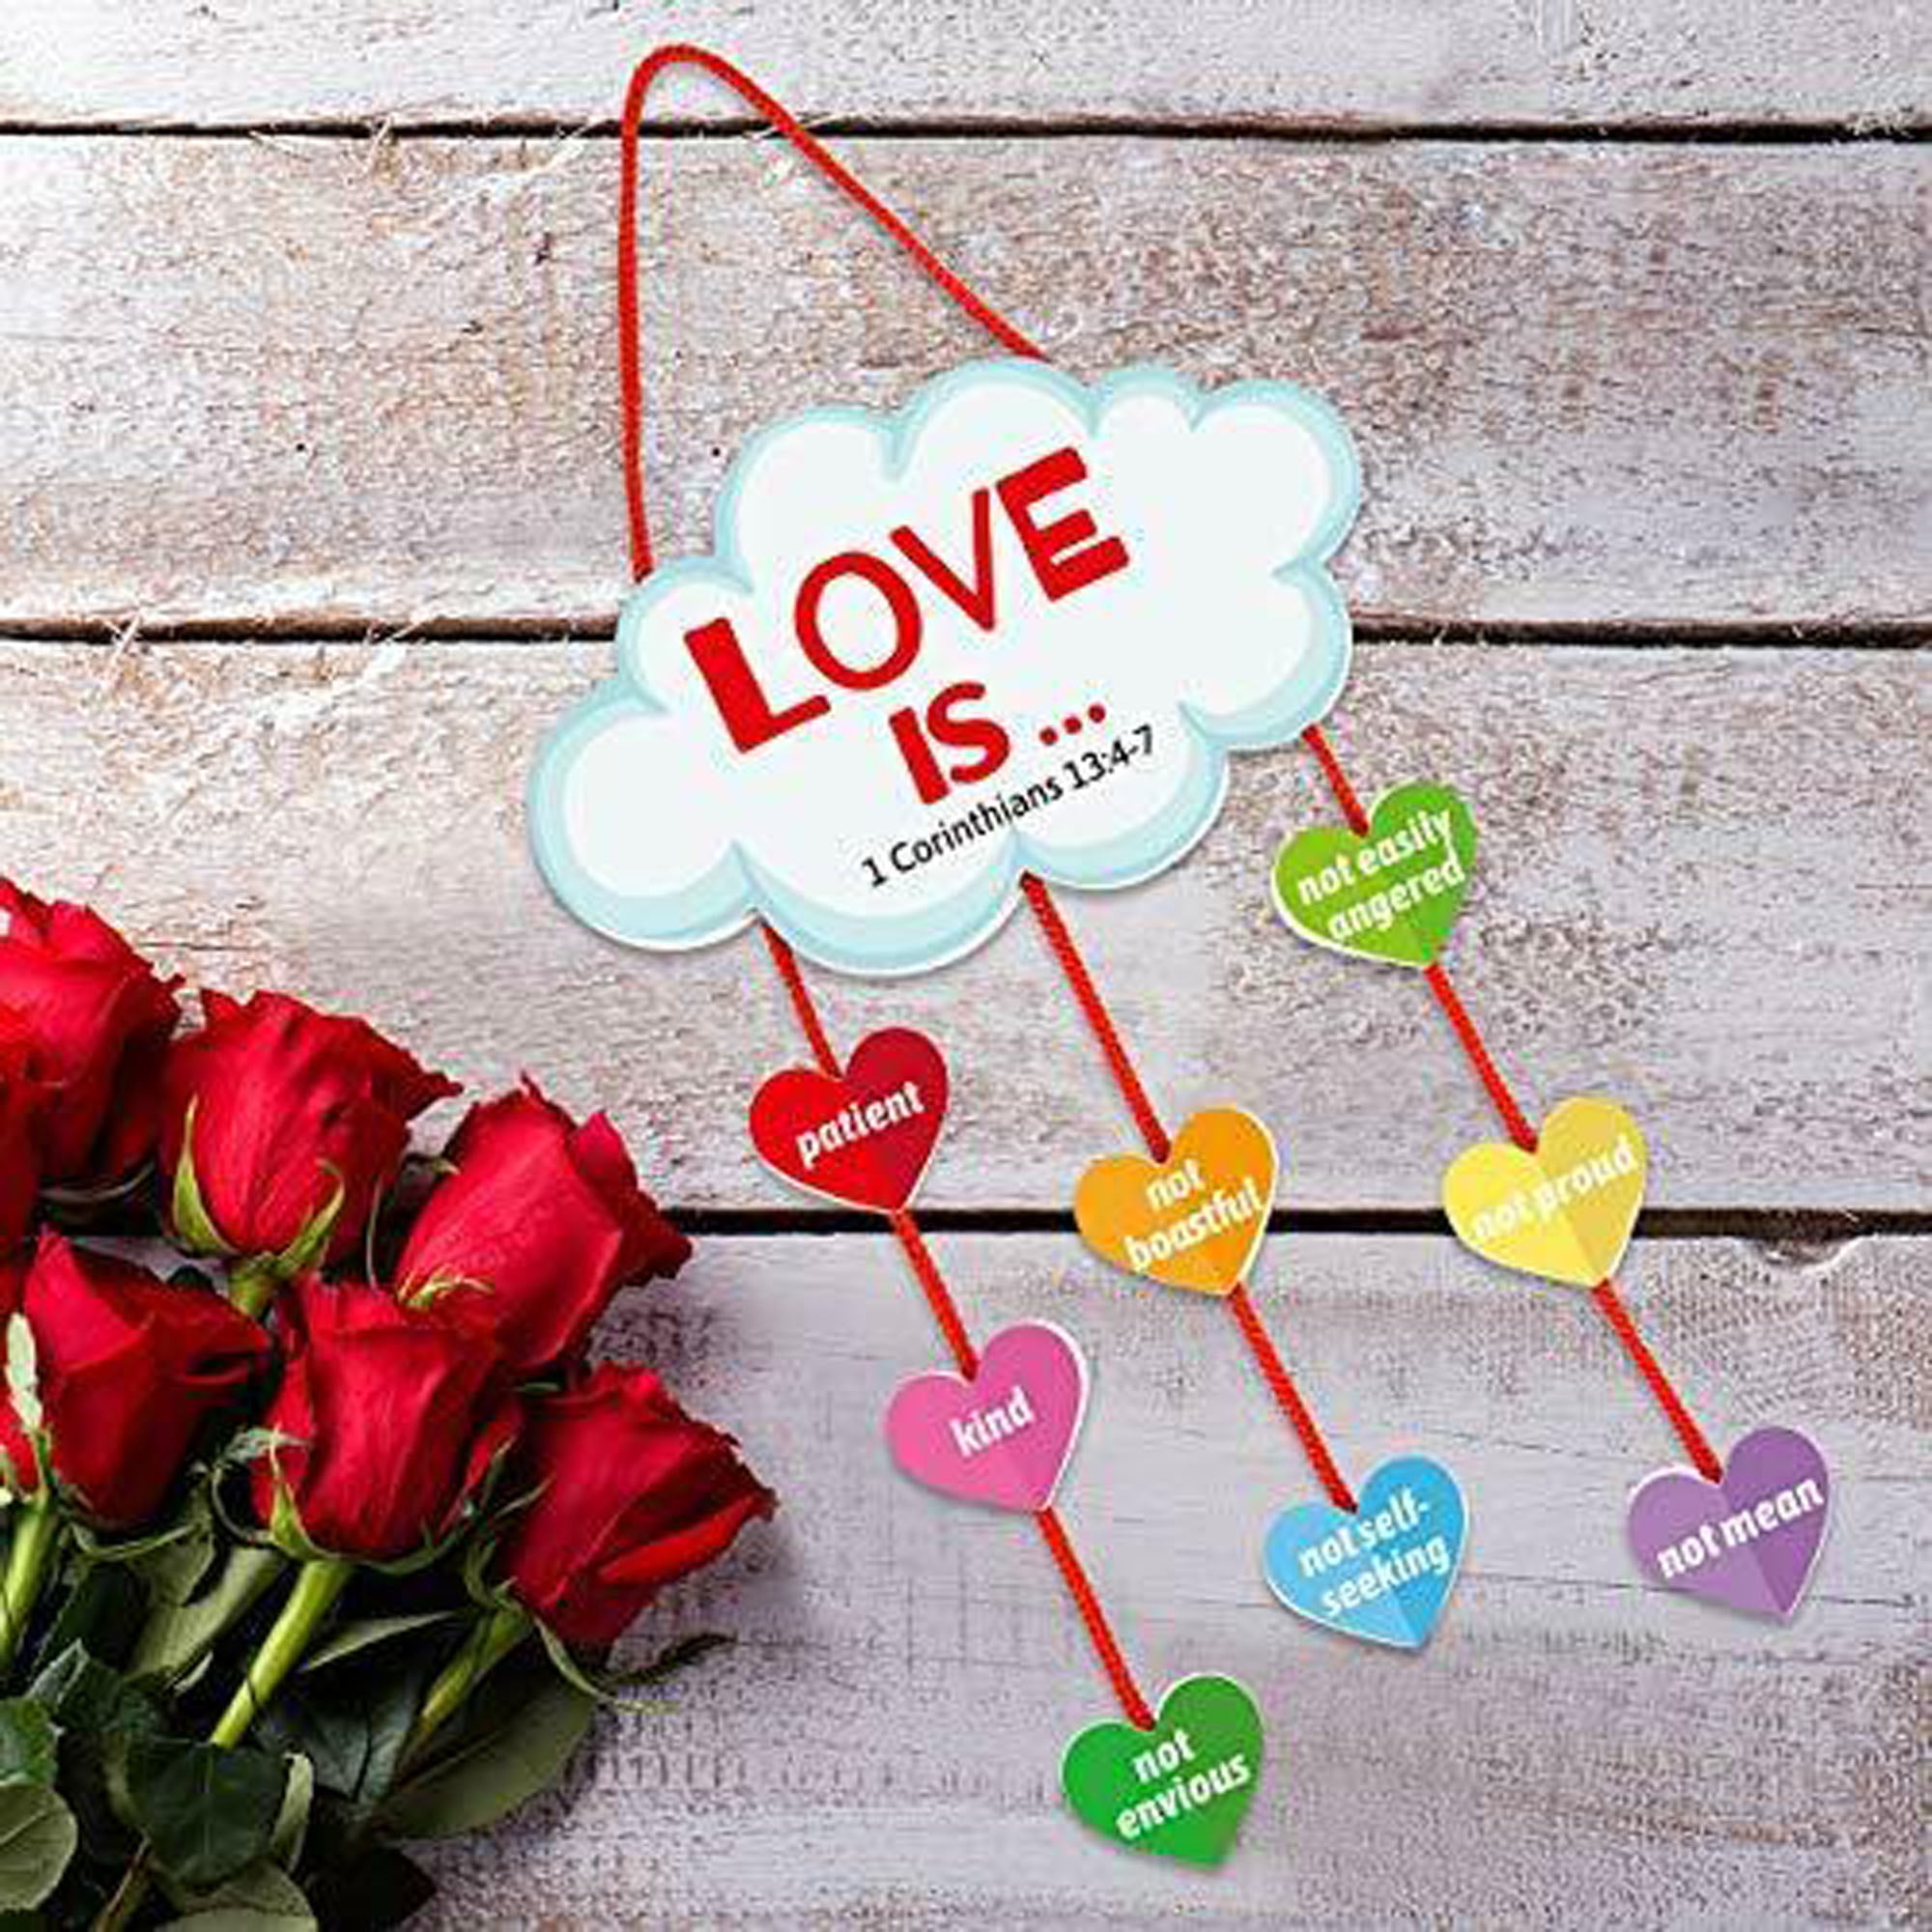 4E's Novelty Valentines Crafts for Kids Foam (Makes 12) Magnet Cupcake &  Heart Cookie Kit Valentines Day Crafts for Kids Bulk for Classroom Home